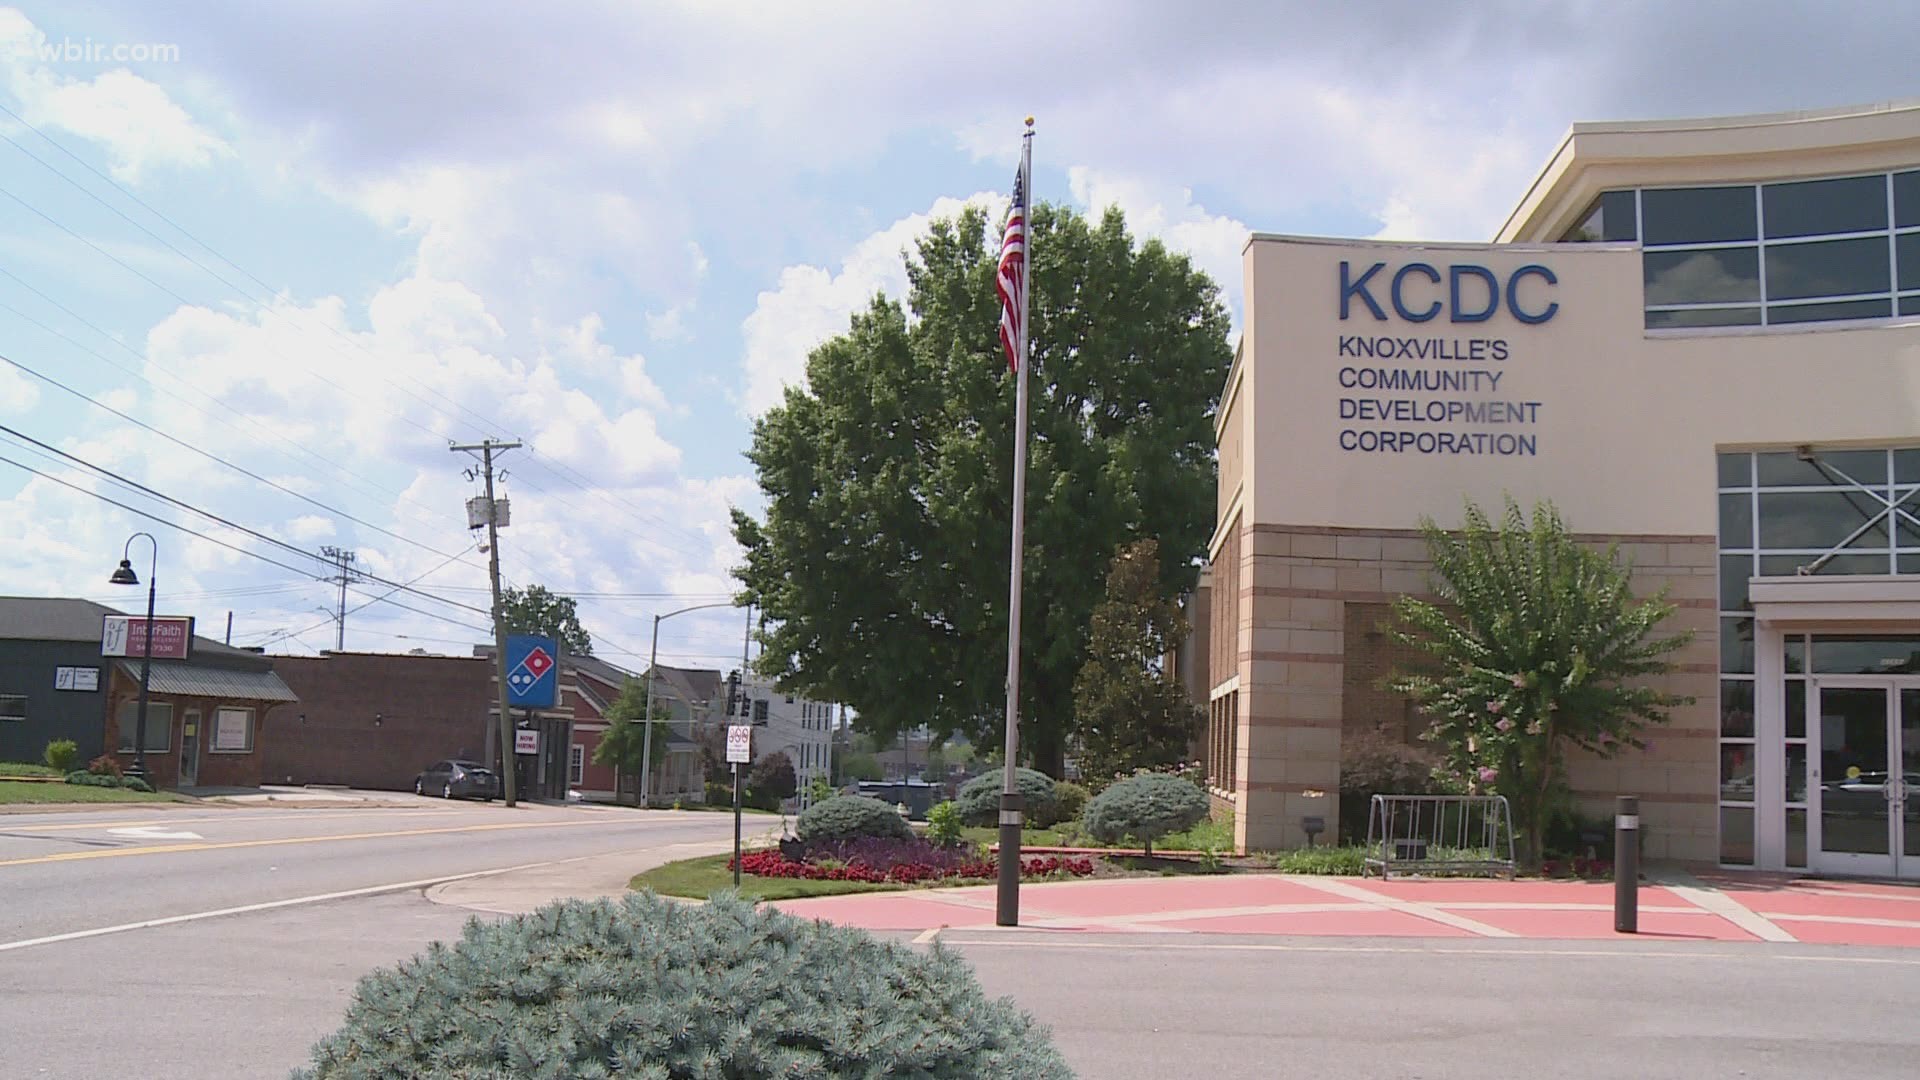 KCDC offering 63 free emergency housing vouchers to the homeless community.